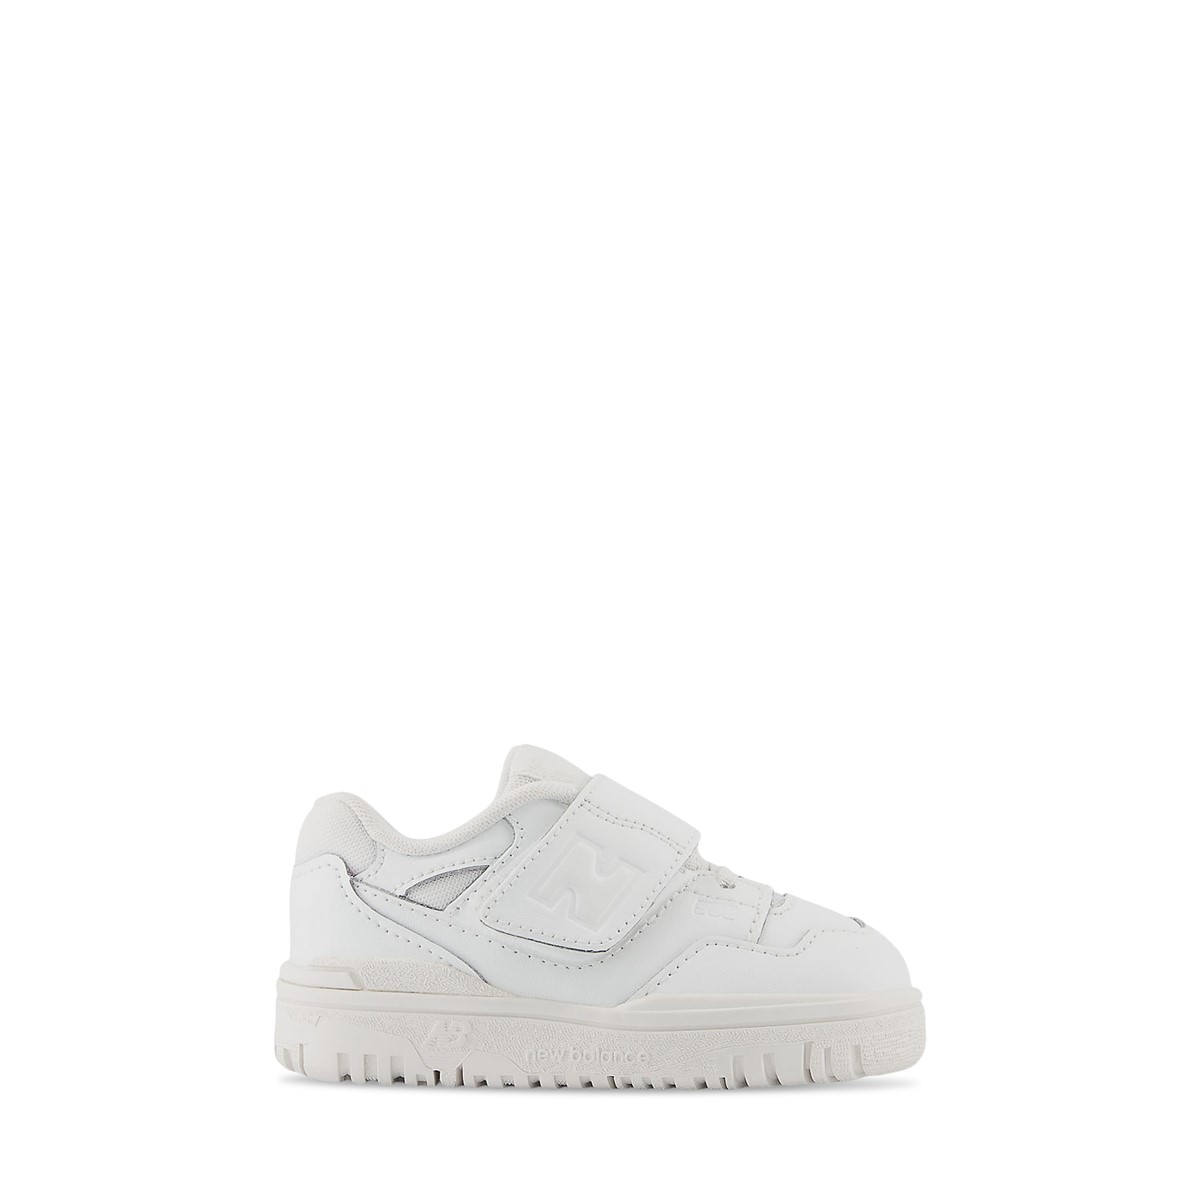 Toddler's BB550 Sneakers in White